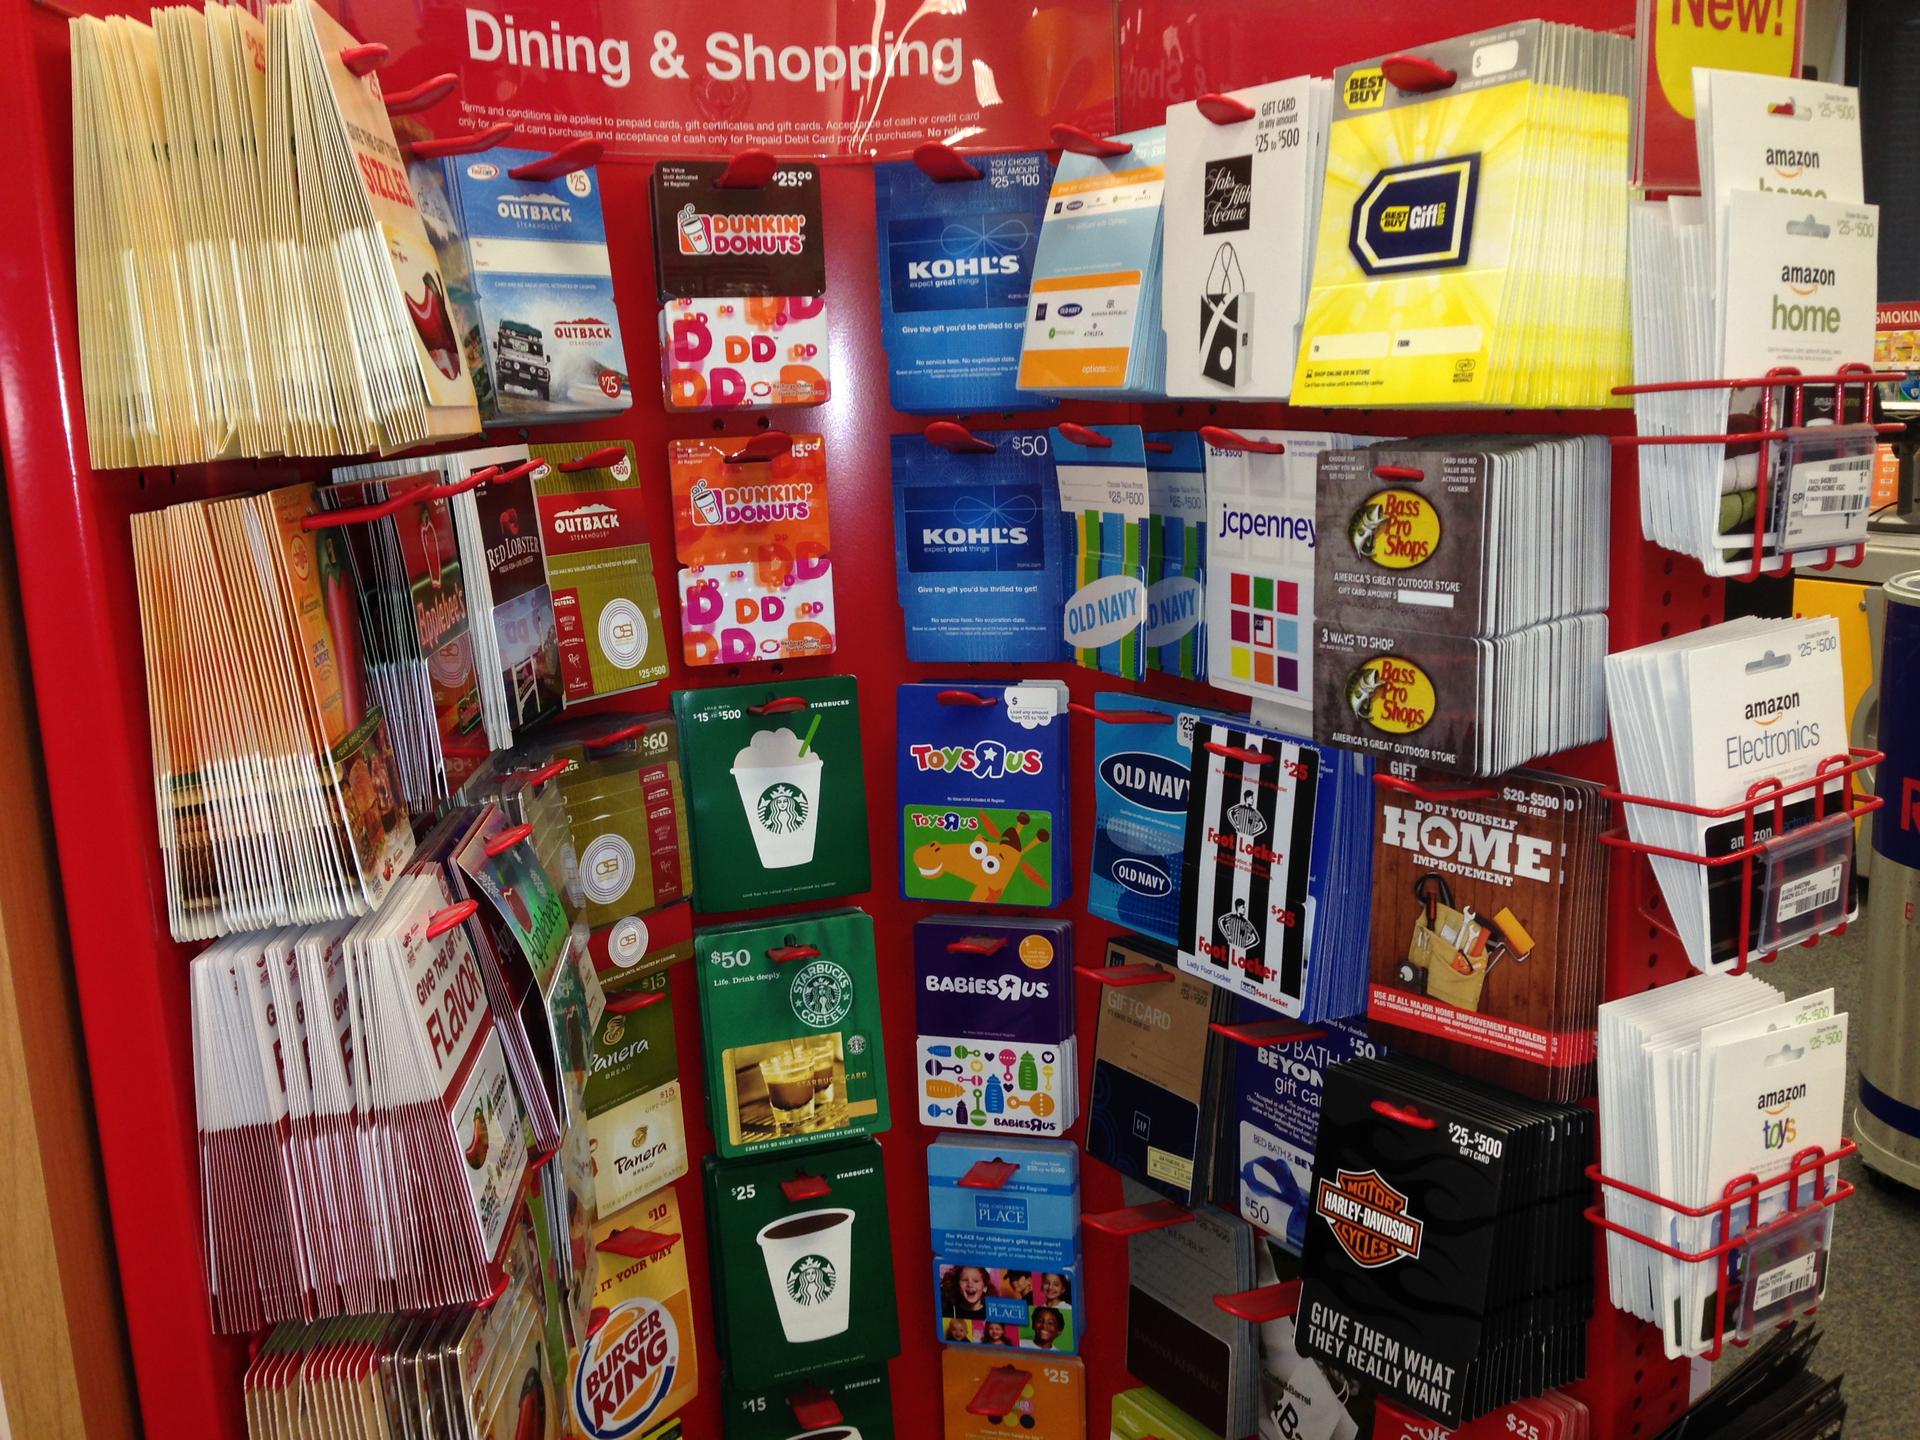 $100 billion worth of gift cards, mostly plastic, will be manufactured in the US this year. 